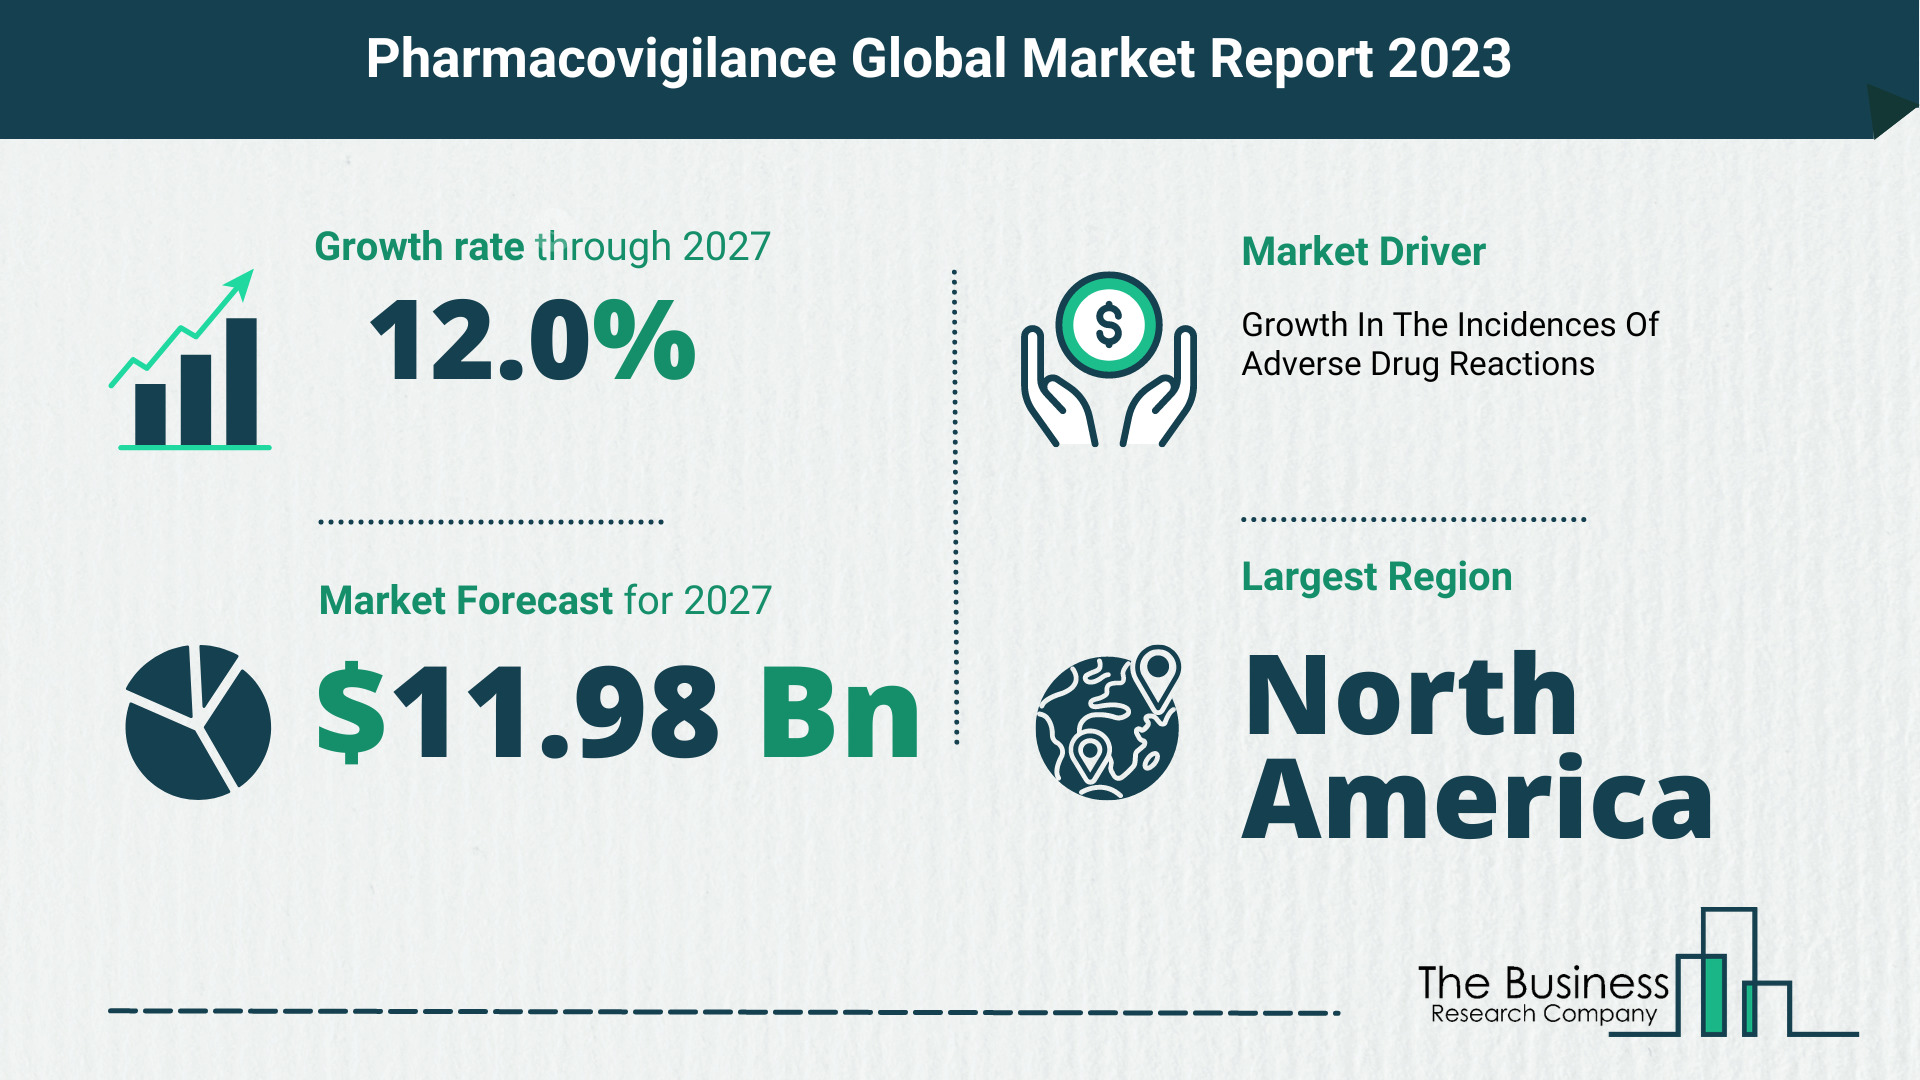 Global Pharmacovigilance Market Opportunities And Strategies 2023